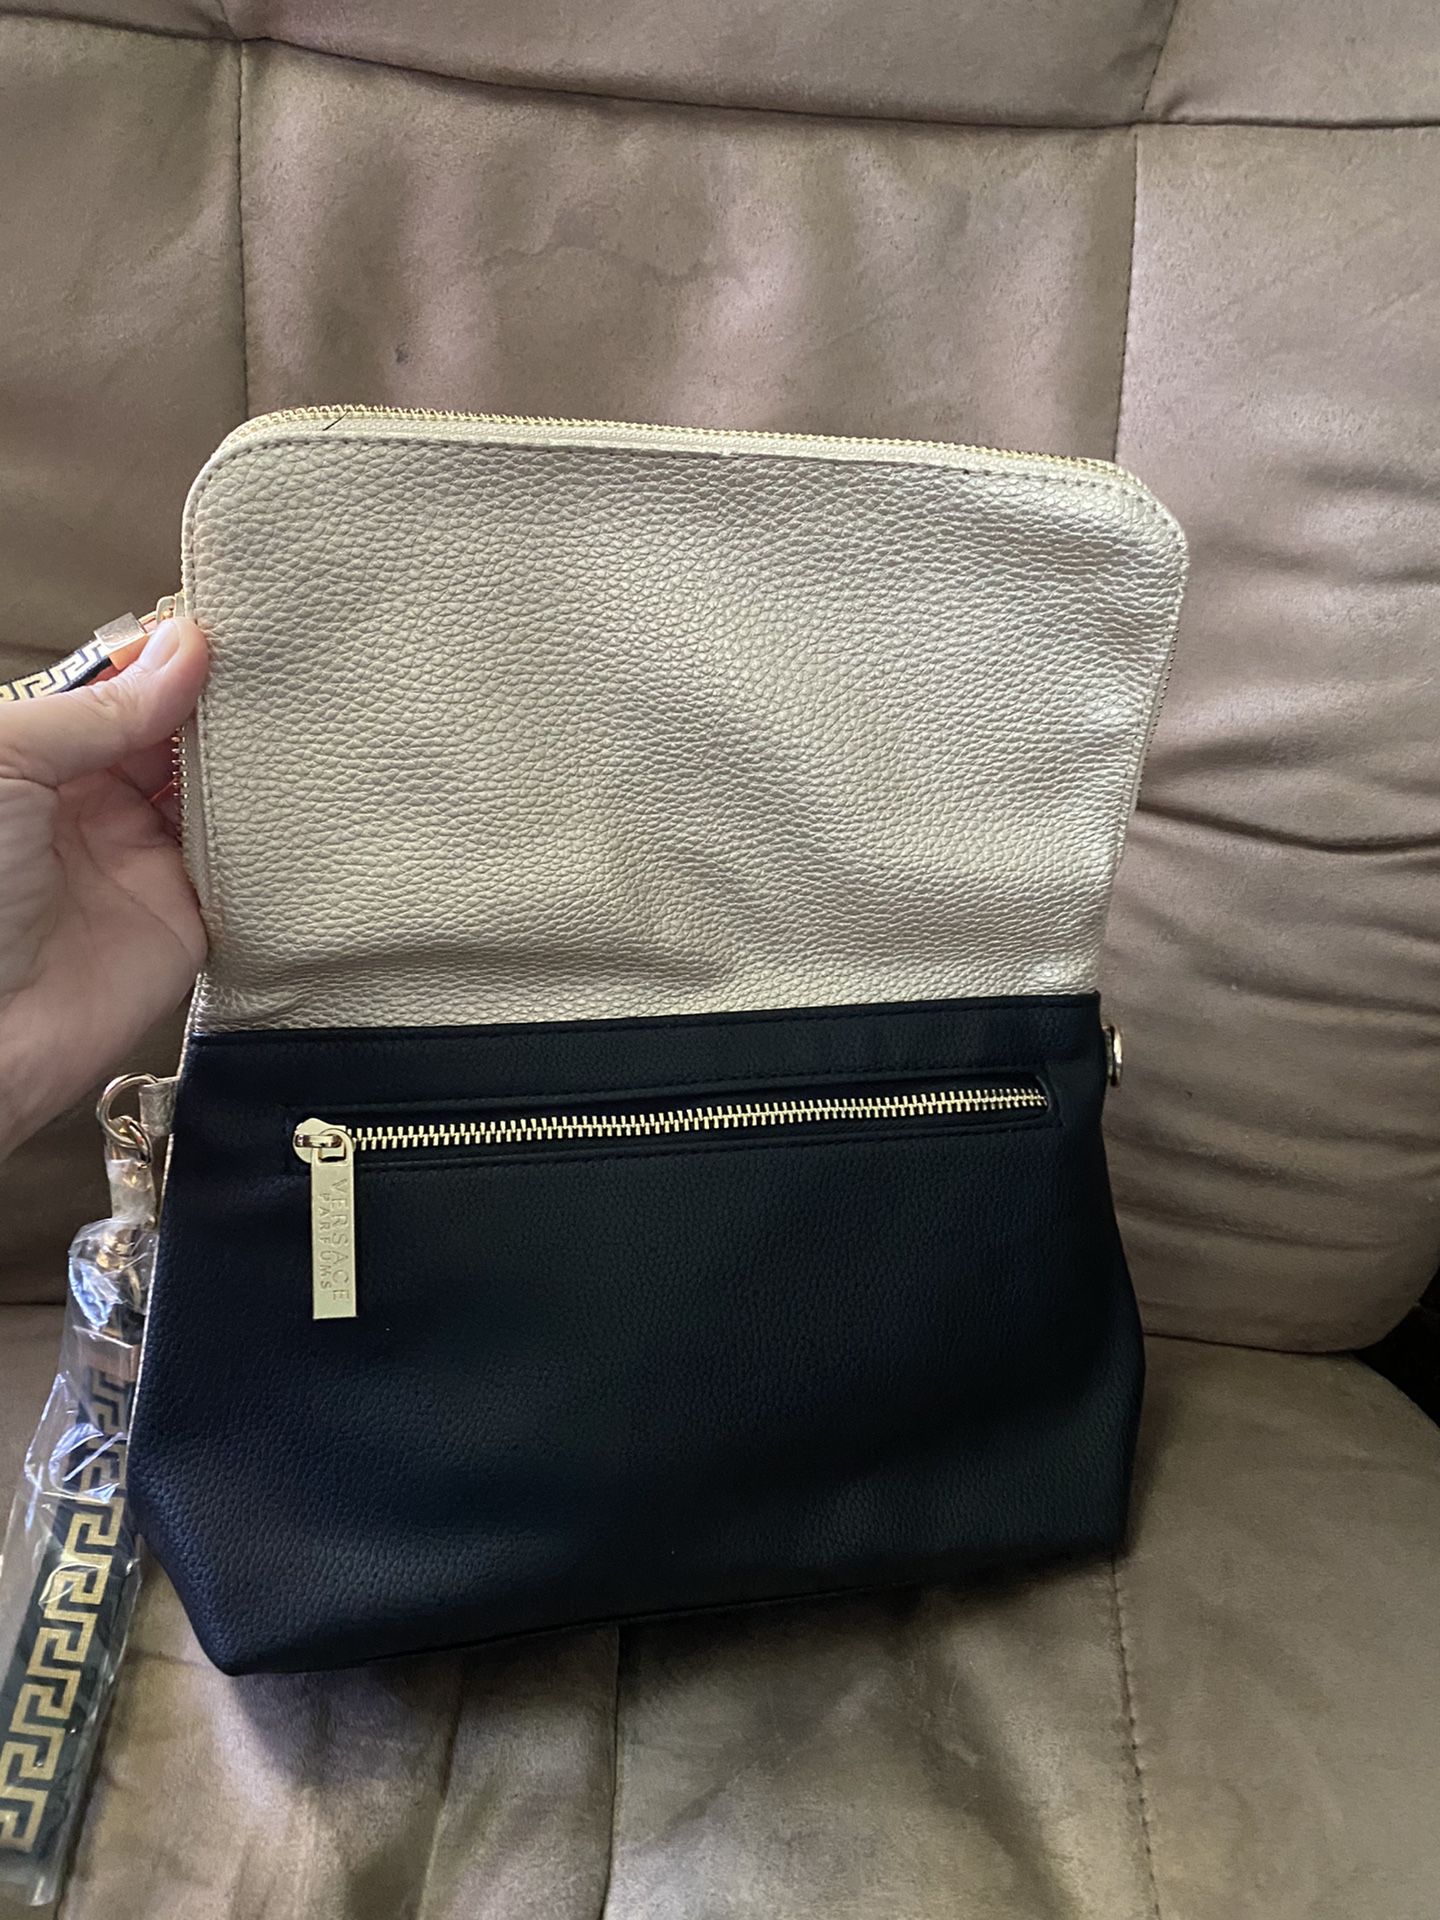 Versace bag for Sale in Snohomish, WA - OfferUp